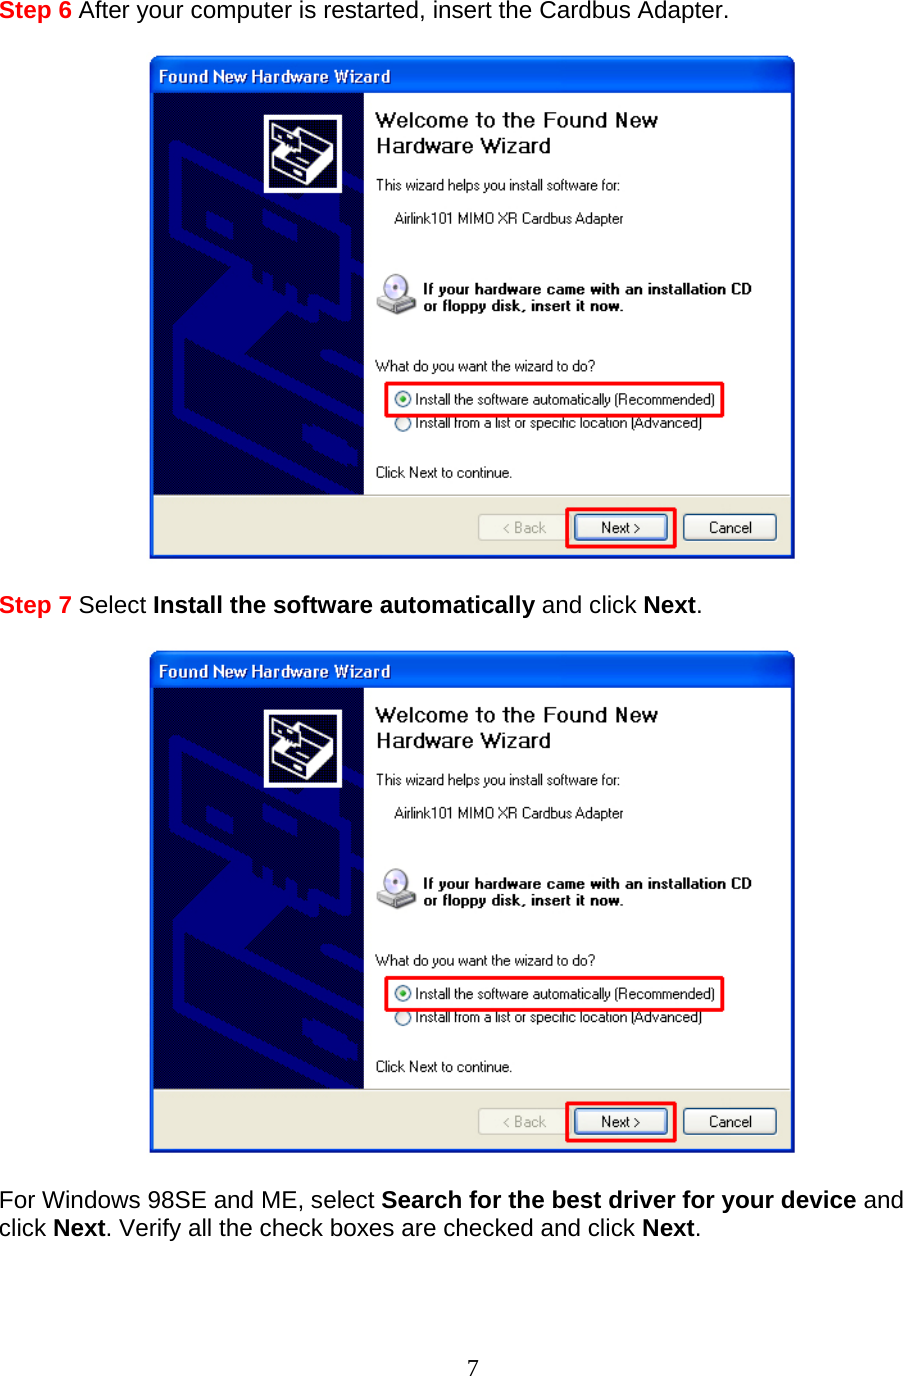 7 Step 6 After your computer is restarted, insert the Cardbus Adapter.    Step 7 Select Install the software automatically and click Next.    For Windows 98SE and ME, select Search for the best driver for your device and click Next. Verify all the check boxes are checked and click Next.   